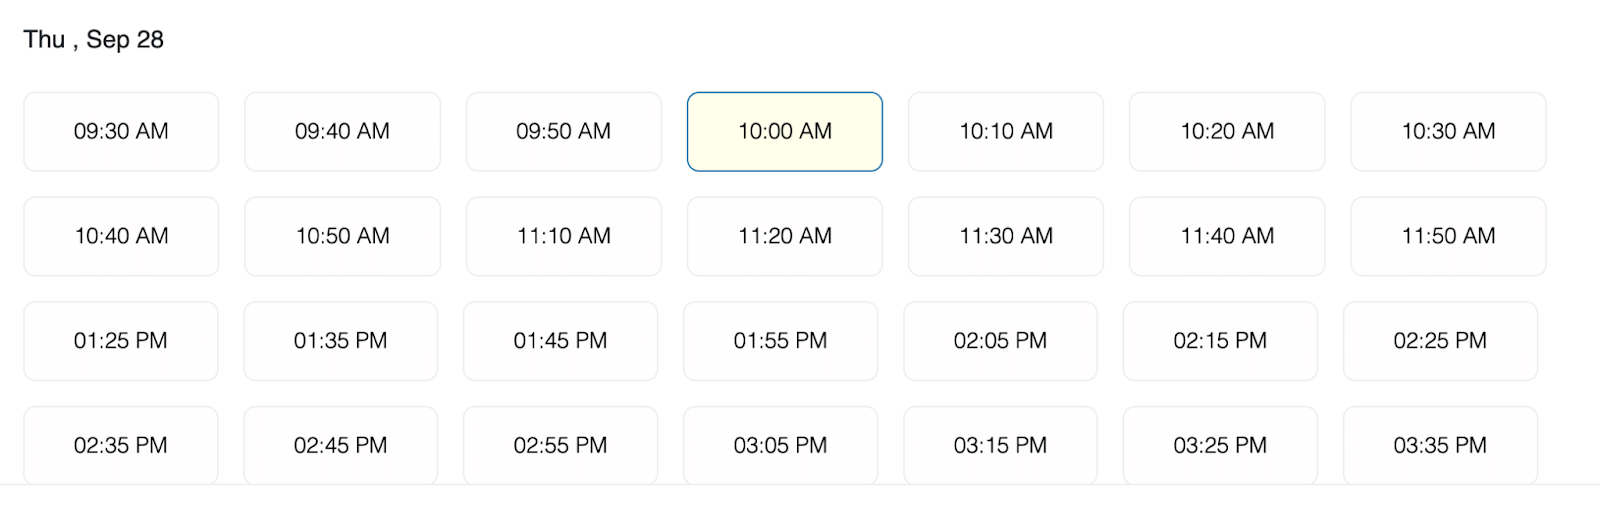 A time slot menu showing options every 10 minutes from 9:30am to 11:50am and 1:25pm to 3:35pm.